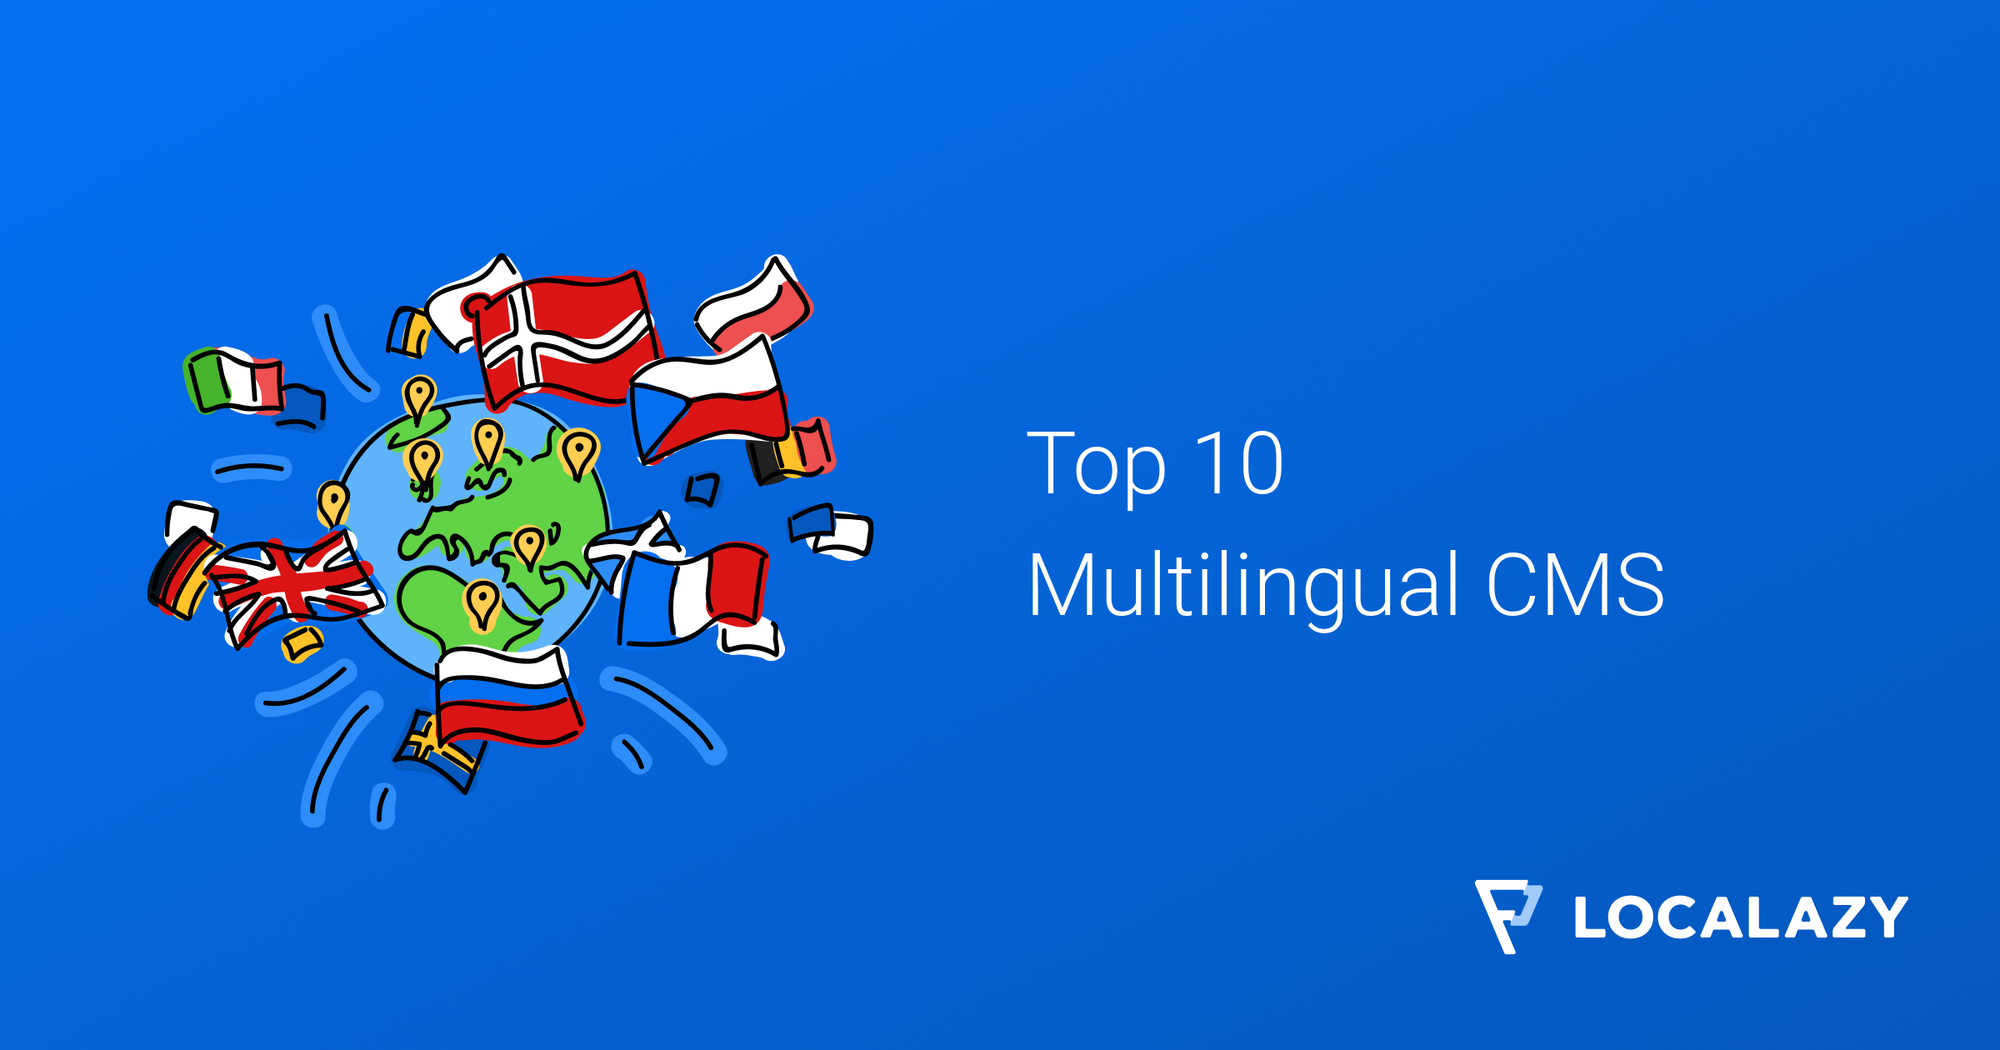 Top 10 Multilingual Content Management Systems